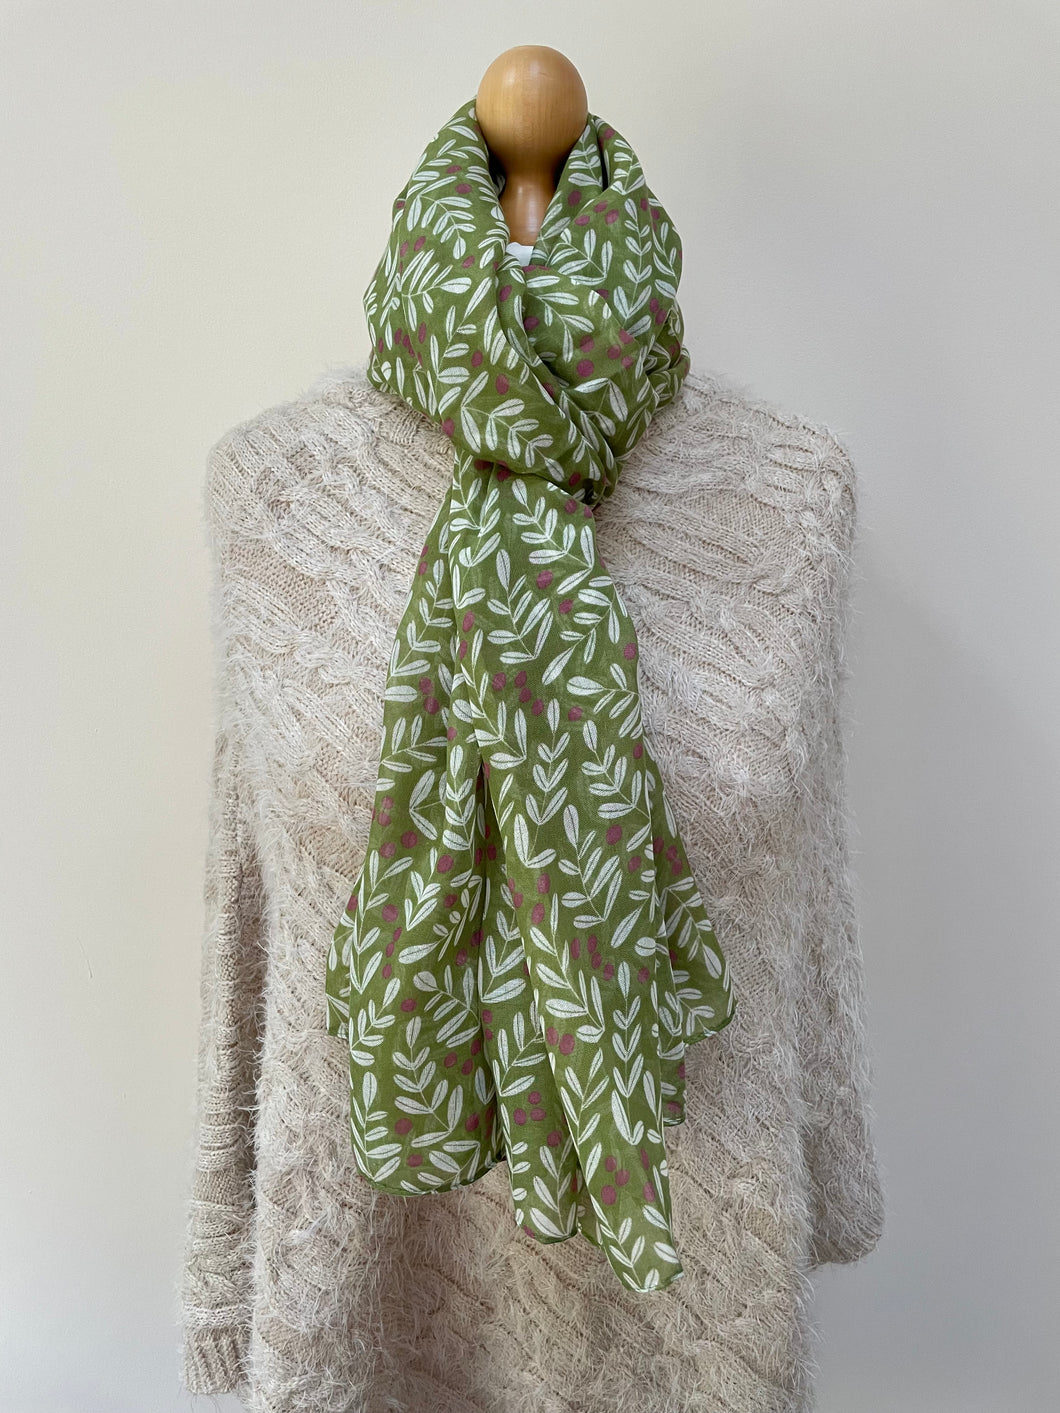 Autumn Green Berry and Branches Scarf